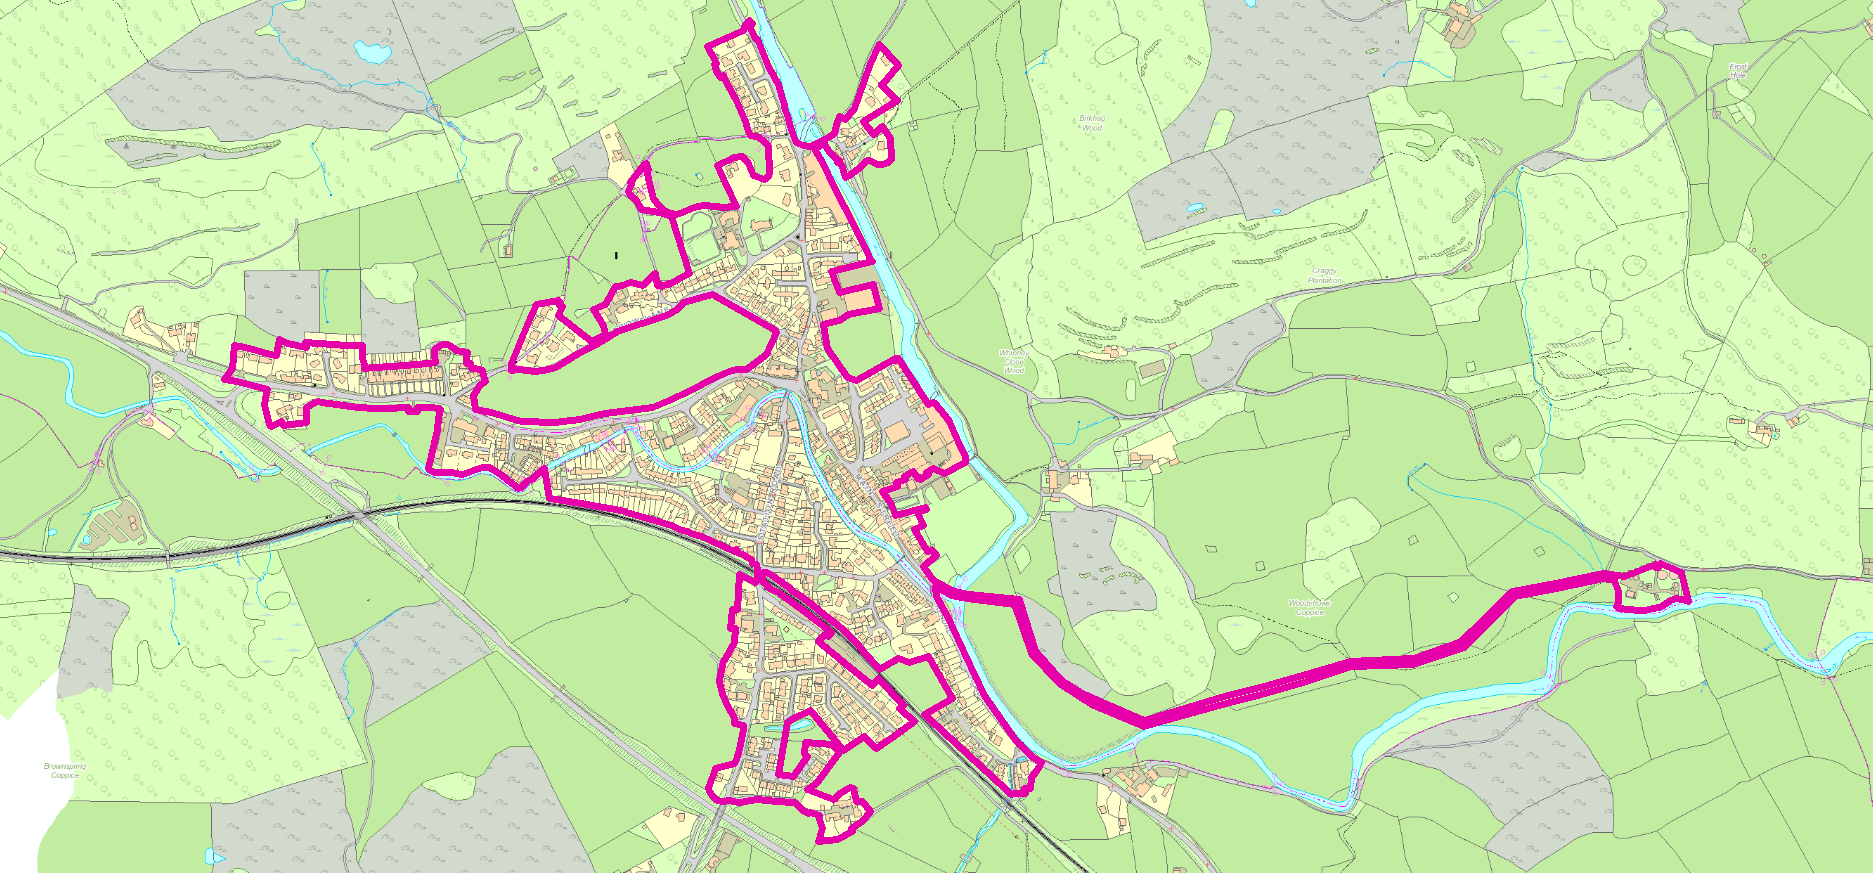 A map of the Staveley area